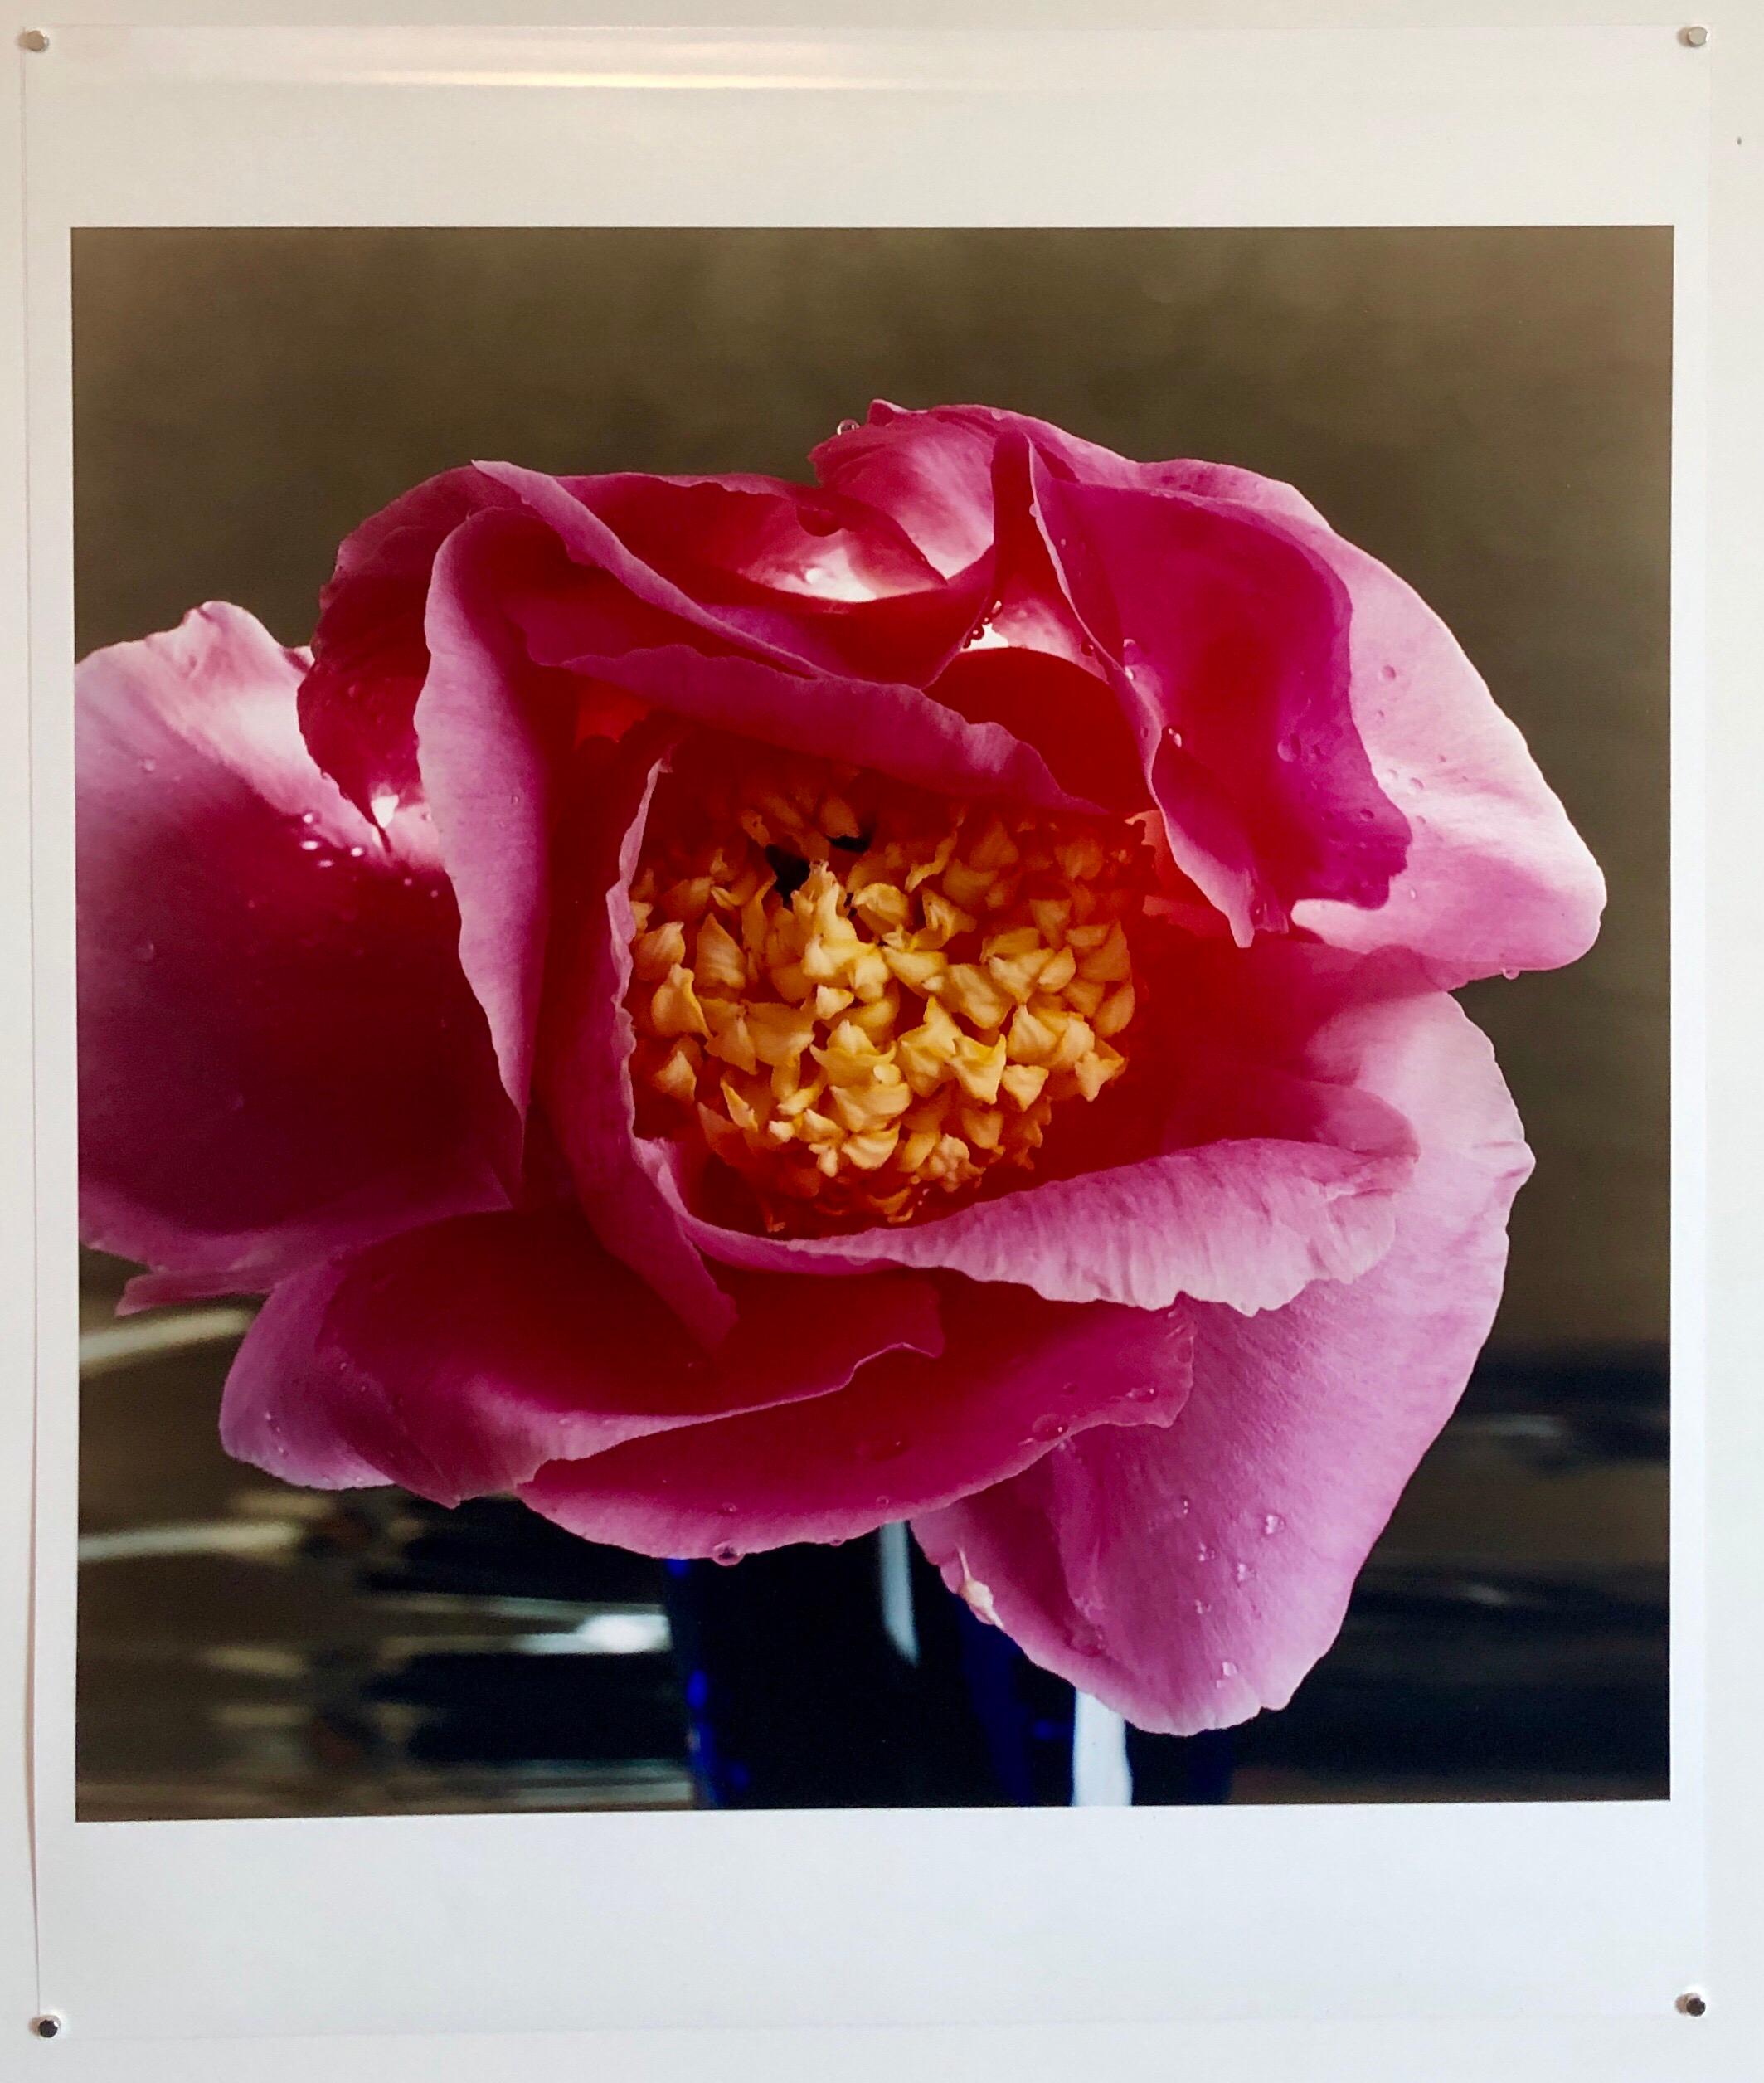 A Bientot, closeup of flower. The Tappen House, Little Compton, RI (Rhode Island). Hand signed and numbered. small edition of 15 (these are on Kodak 
Moody photos of a summer vacation house at the beach.  

Peter C. Jones is a fine art photographer,